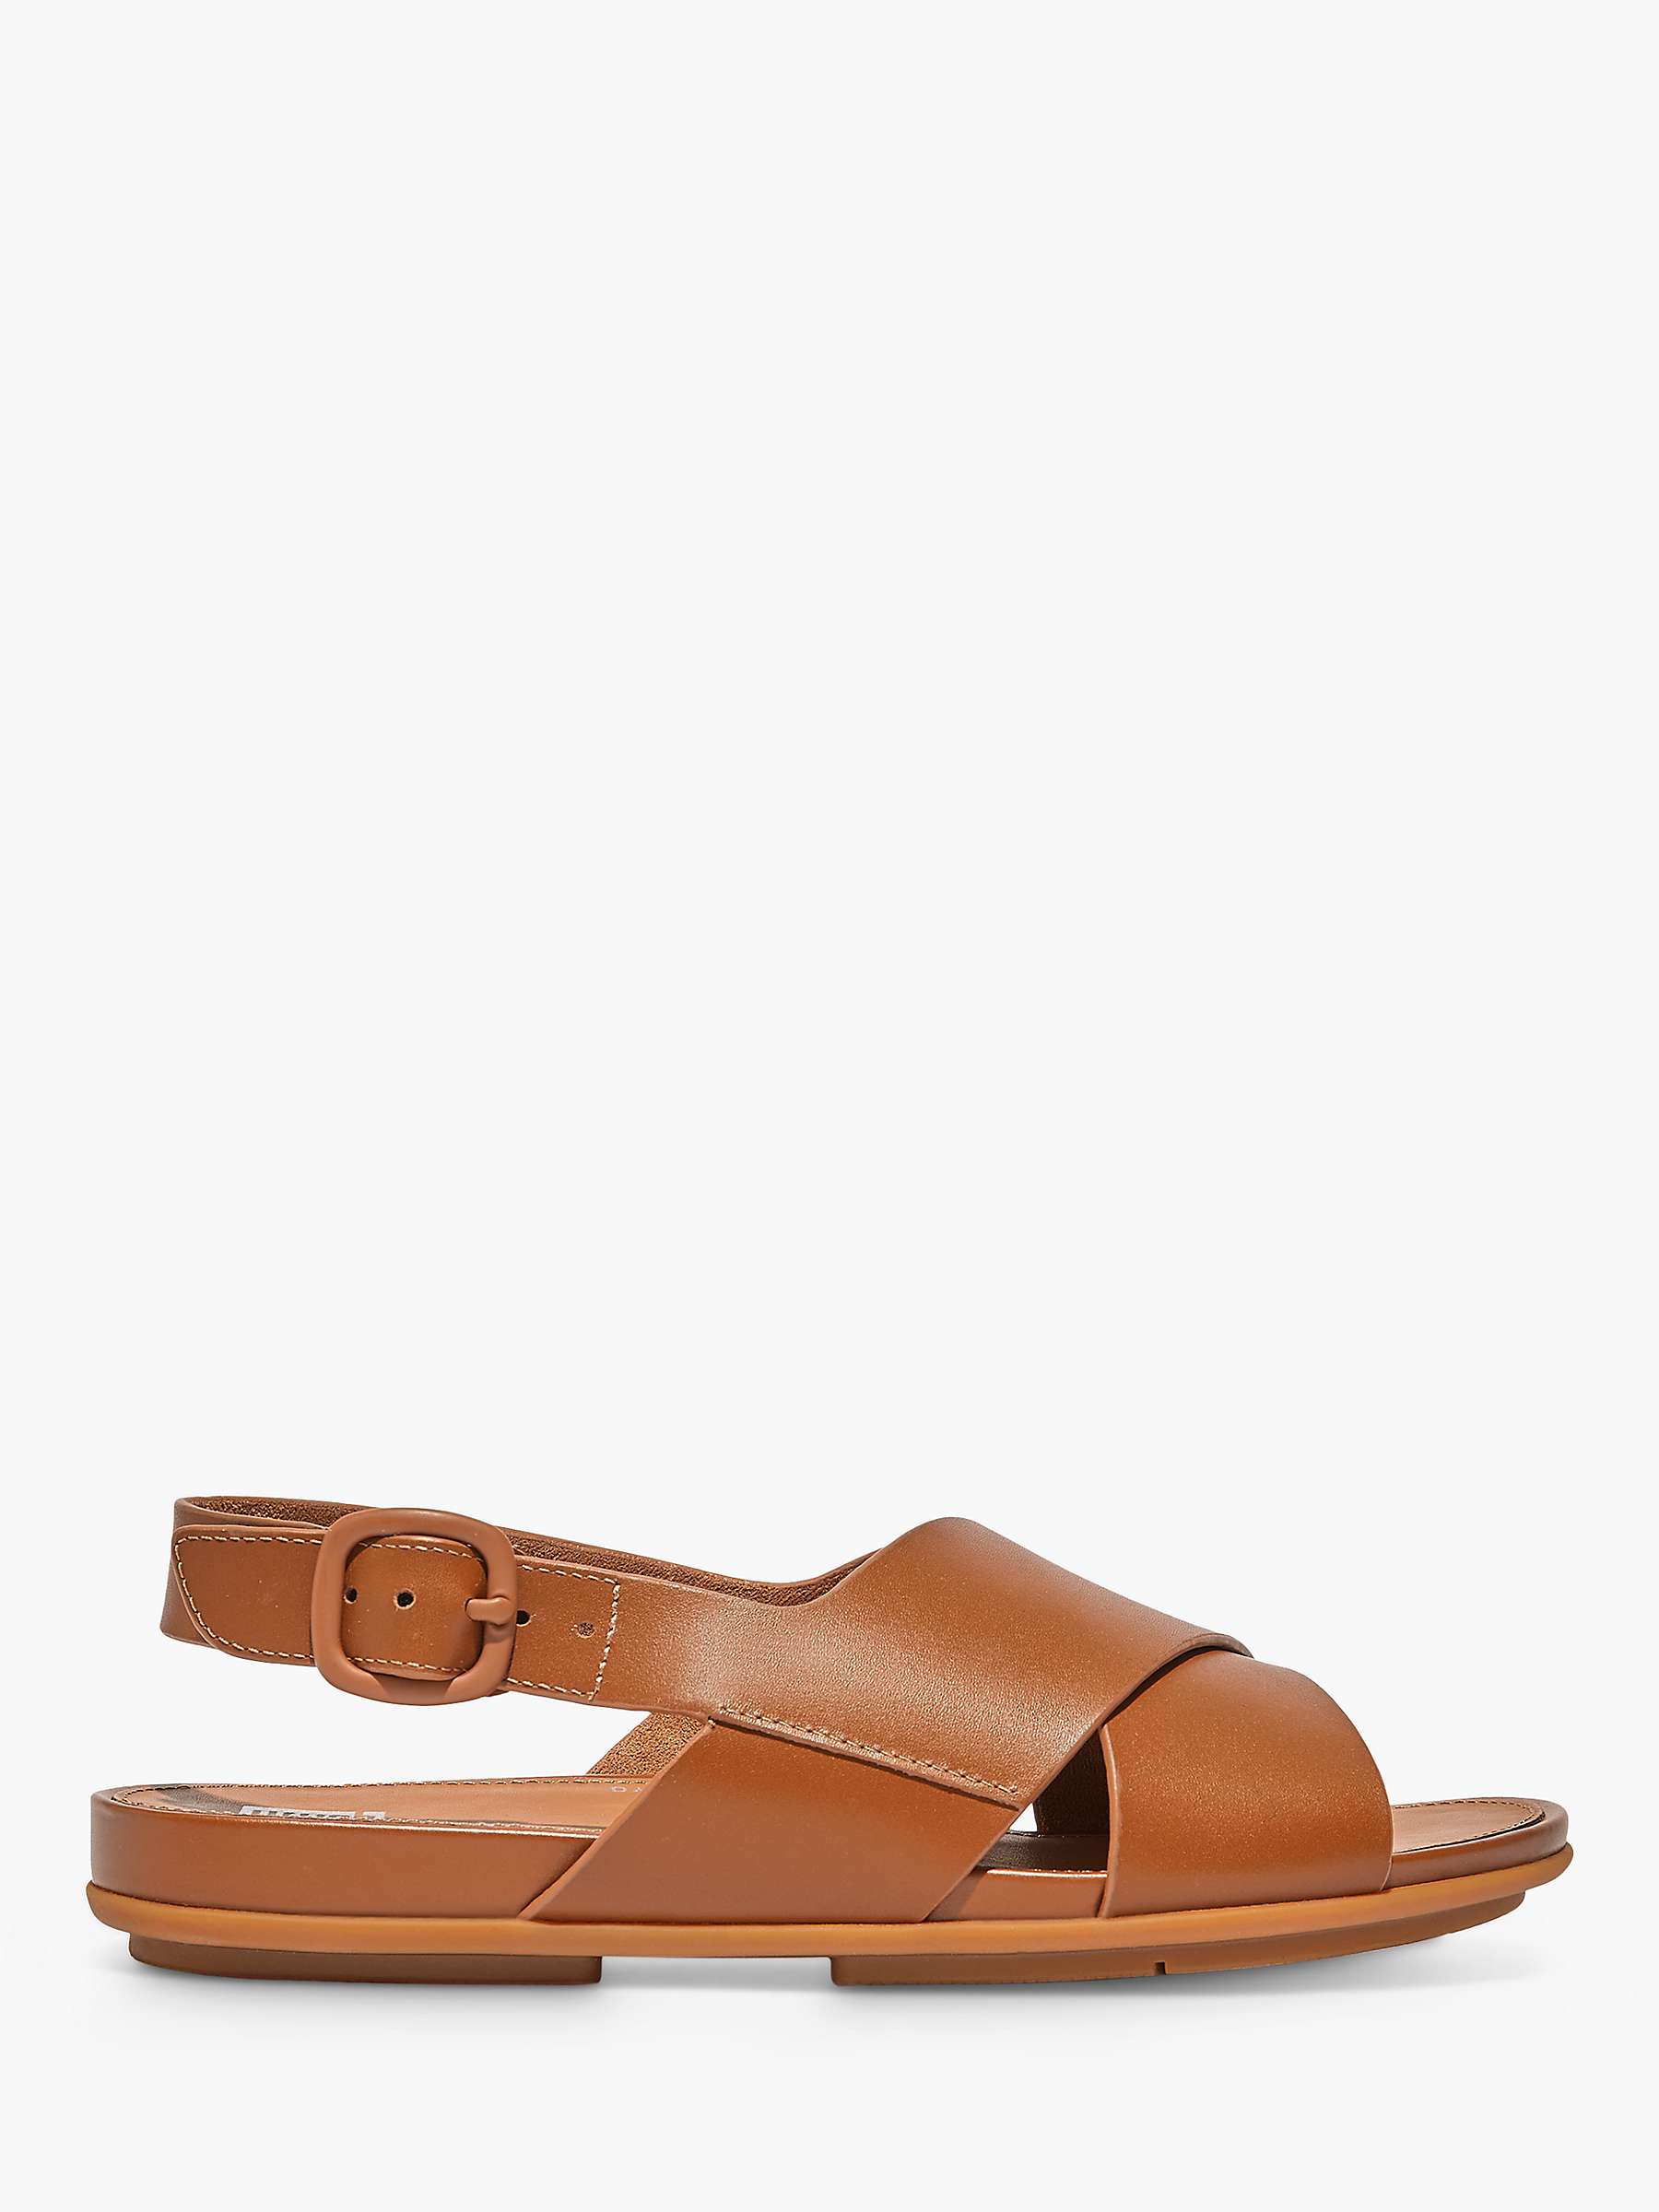 FitFlop Gracie Leather Back Sandals, Light Tan at John Lewis & Partners